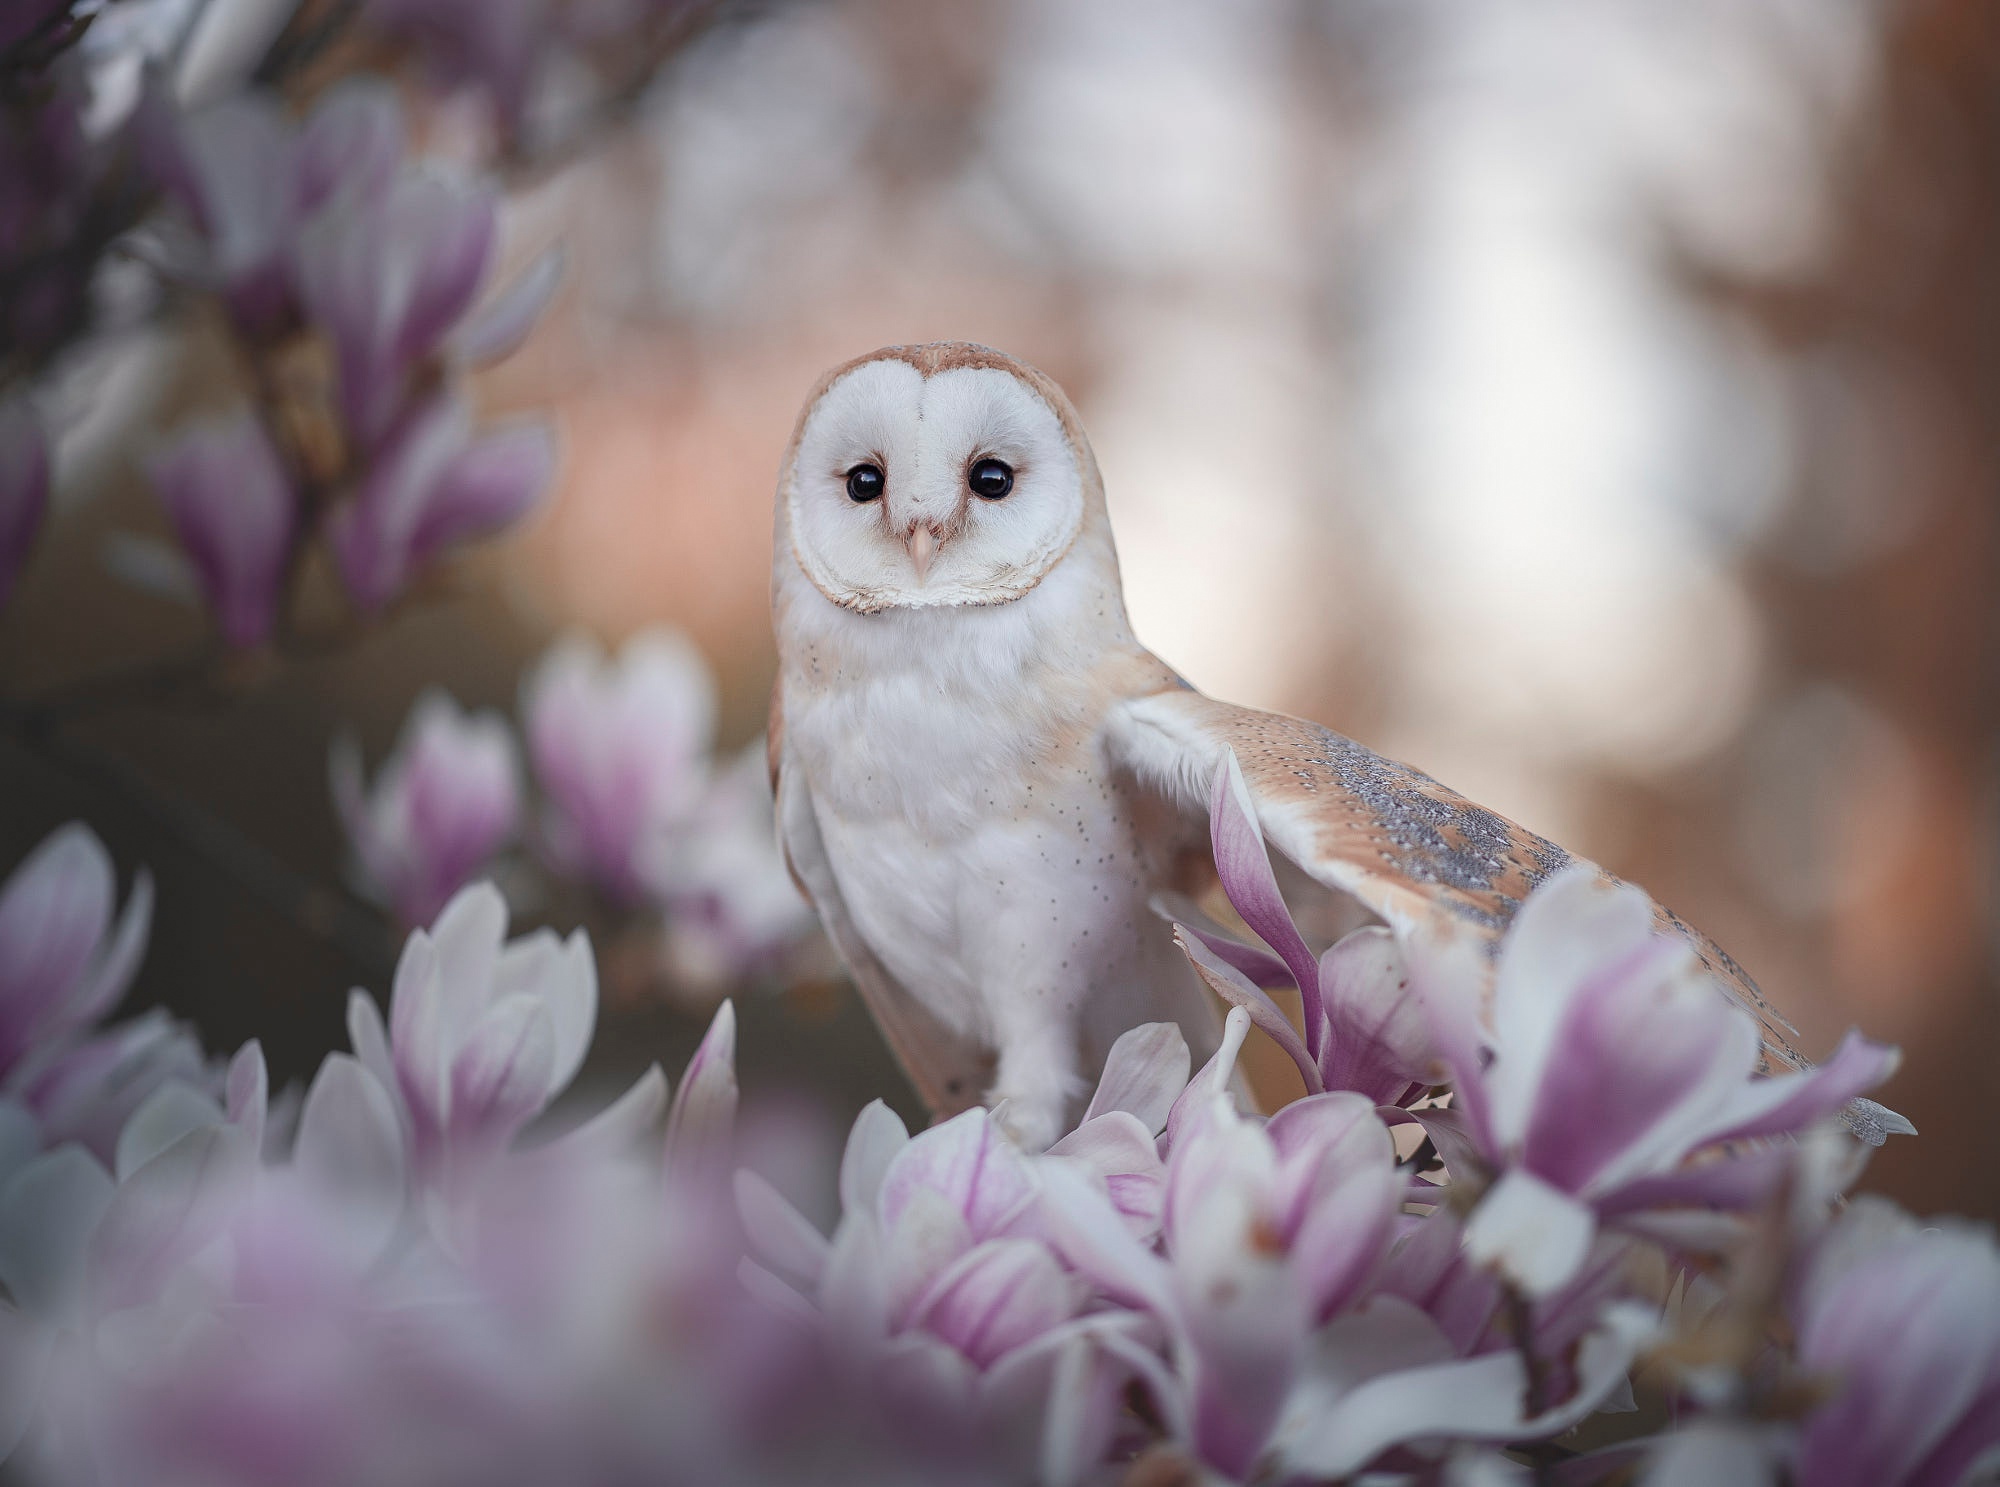 Barn Owl Photos Download The BEST Free Barn Owl Stock Photos  HD Images